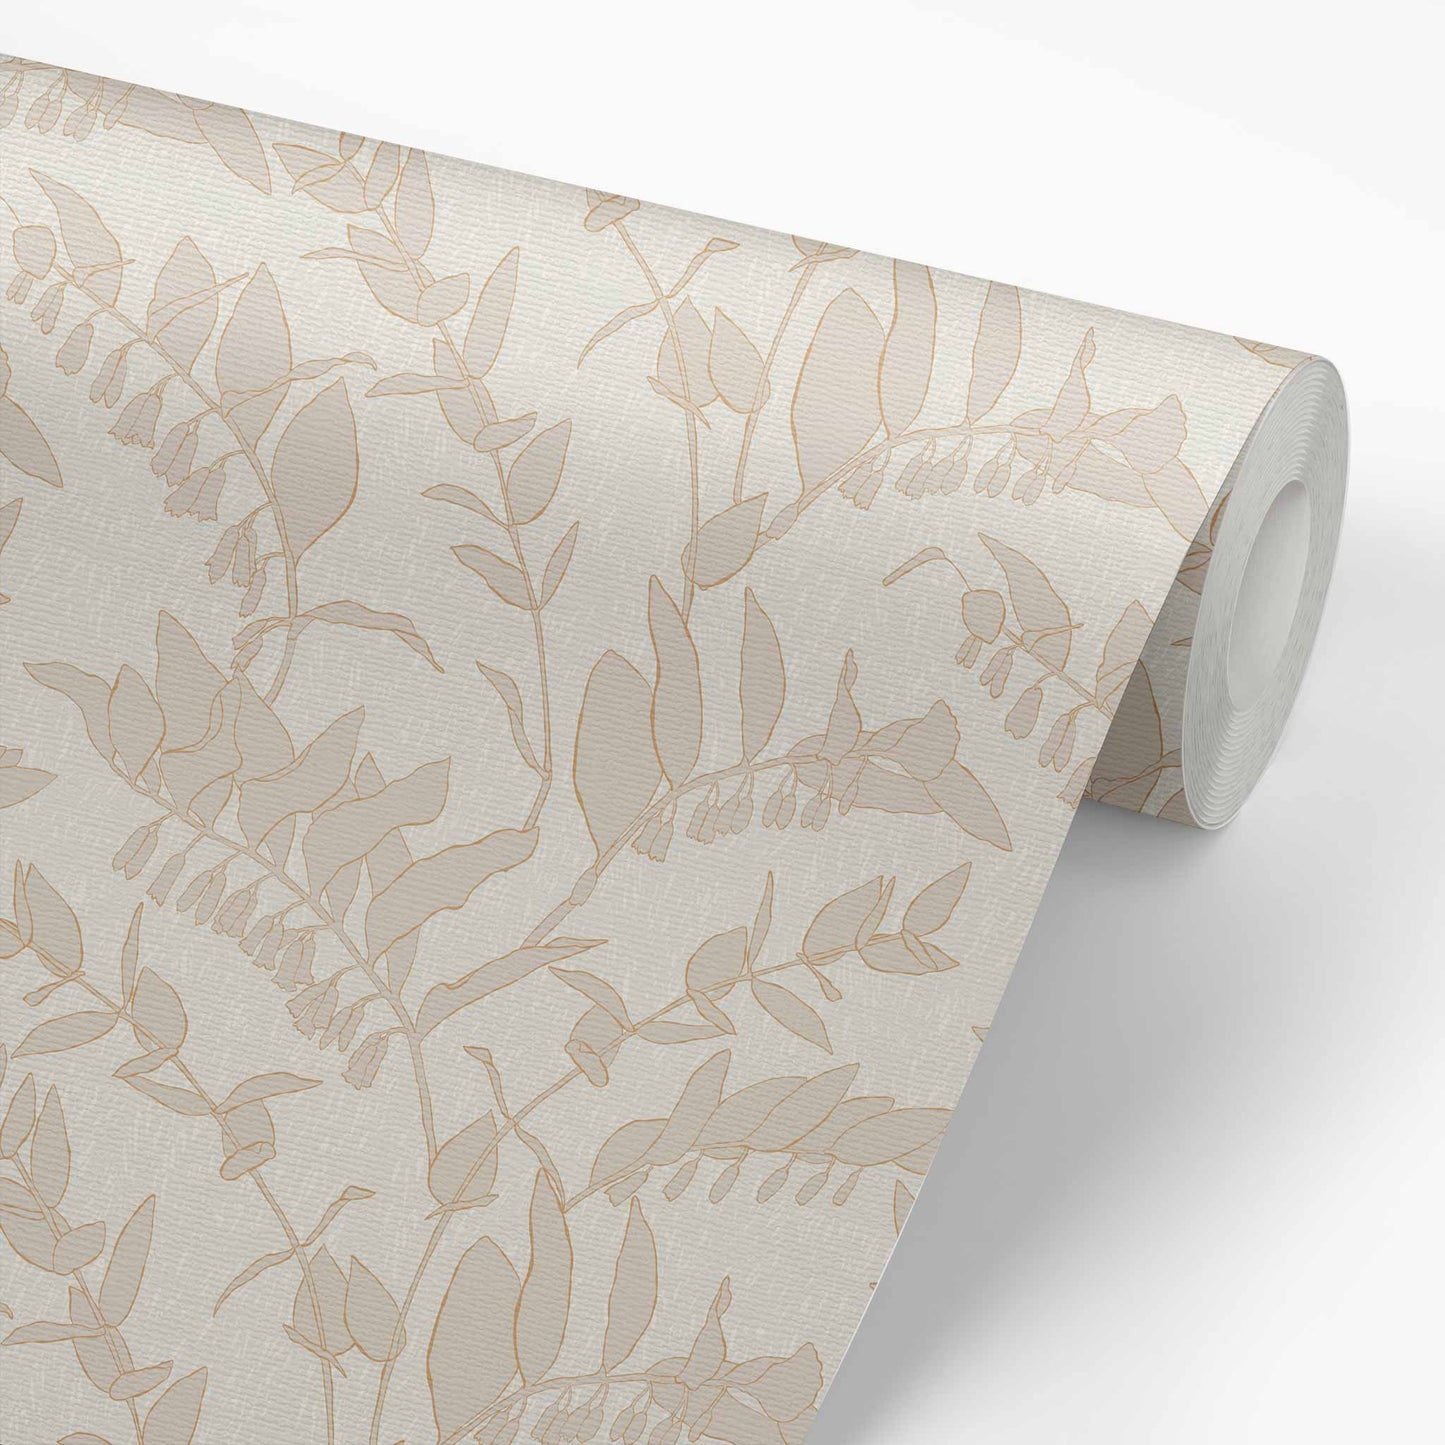 Vines Wallpaper in Soft Beige adds an appreciation of understated chicness to any interior, offering a funky and moody essence to any space it graces.